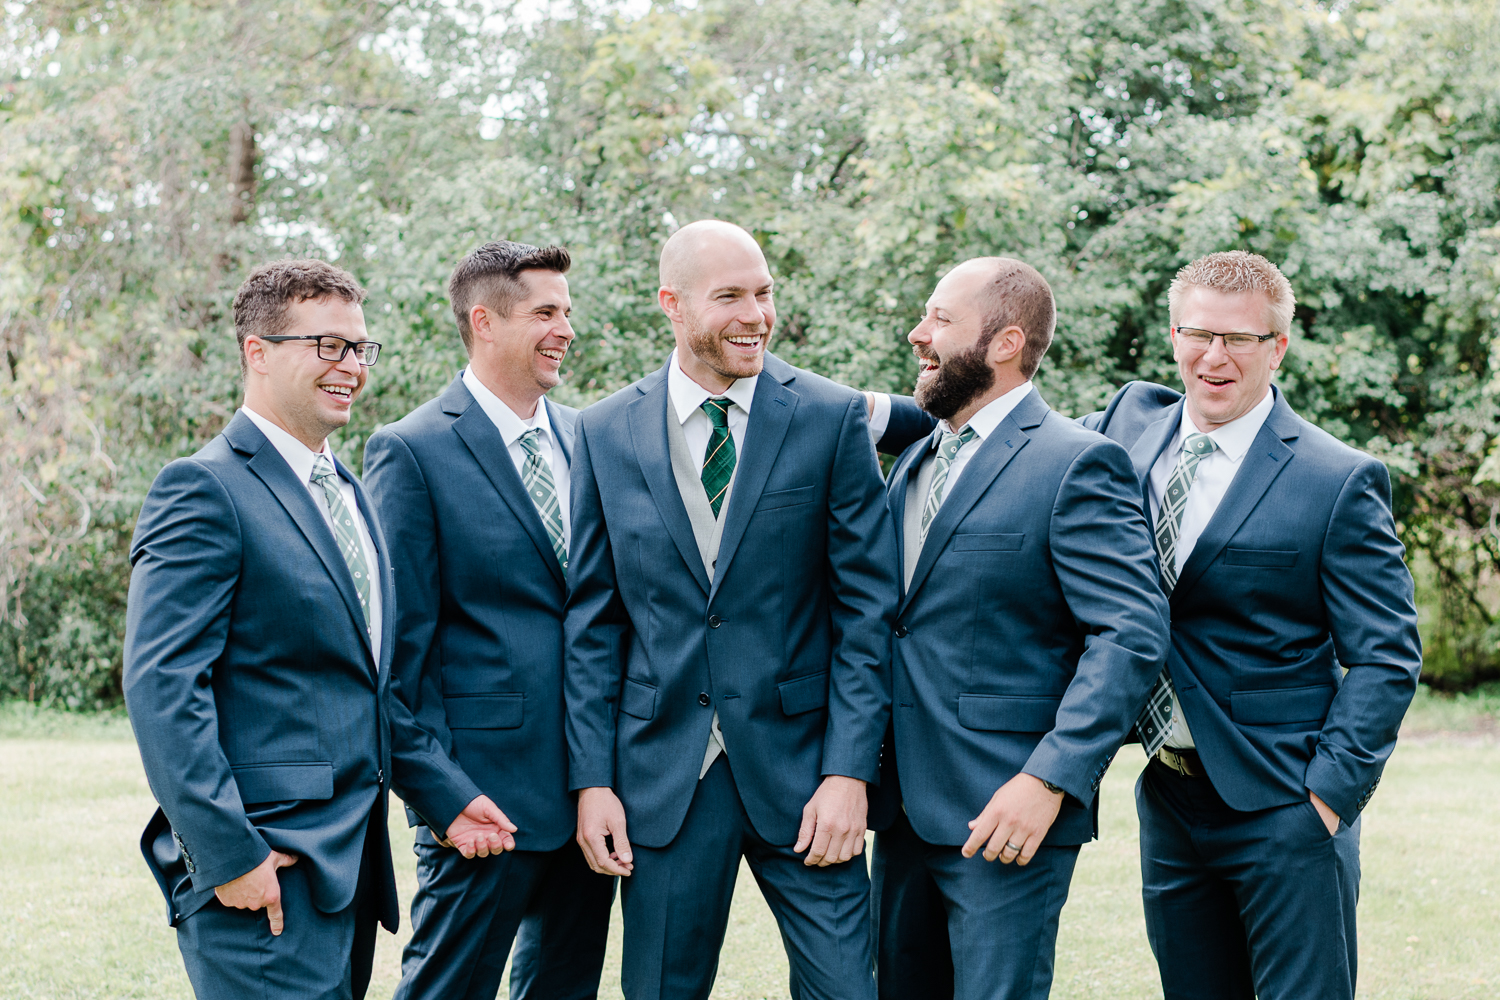 Groom with groomsmen in blue suits smiling at each other